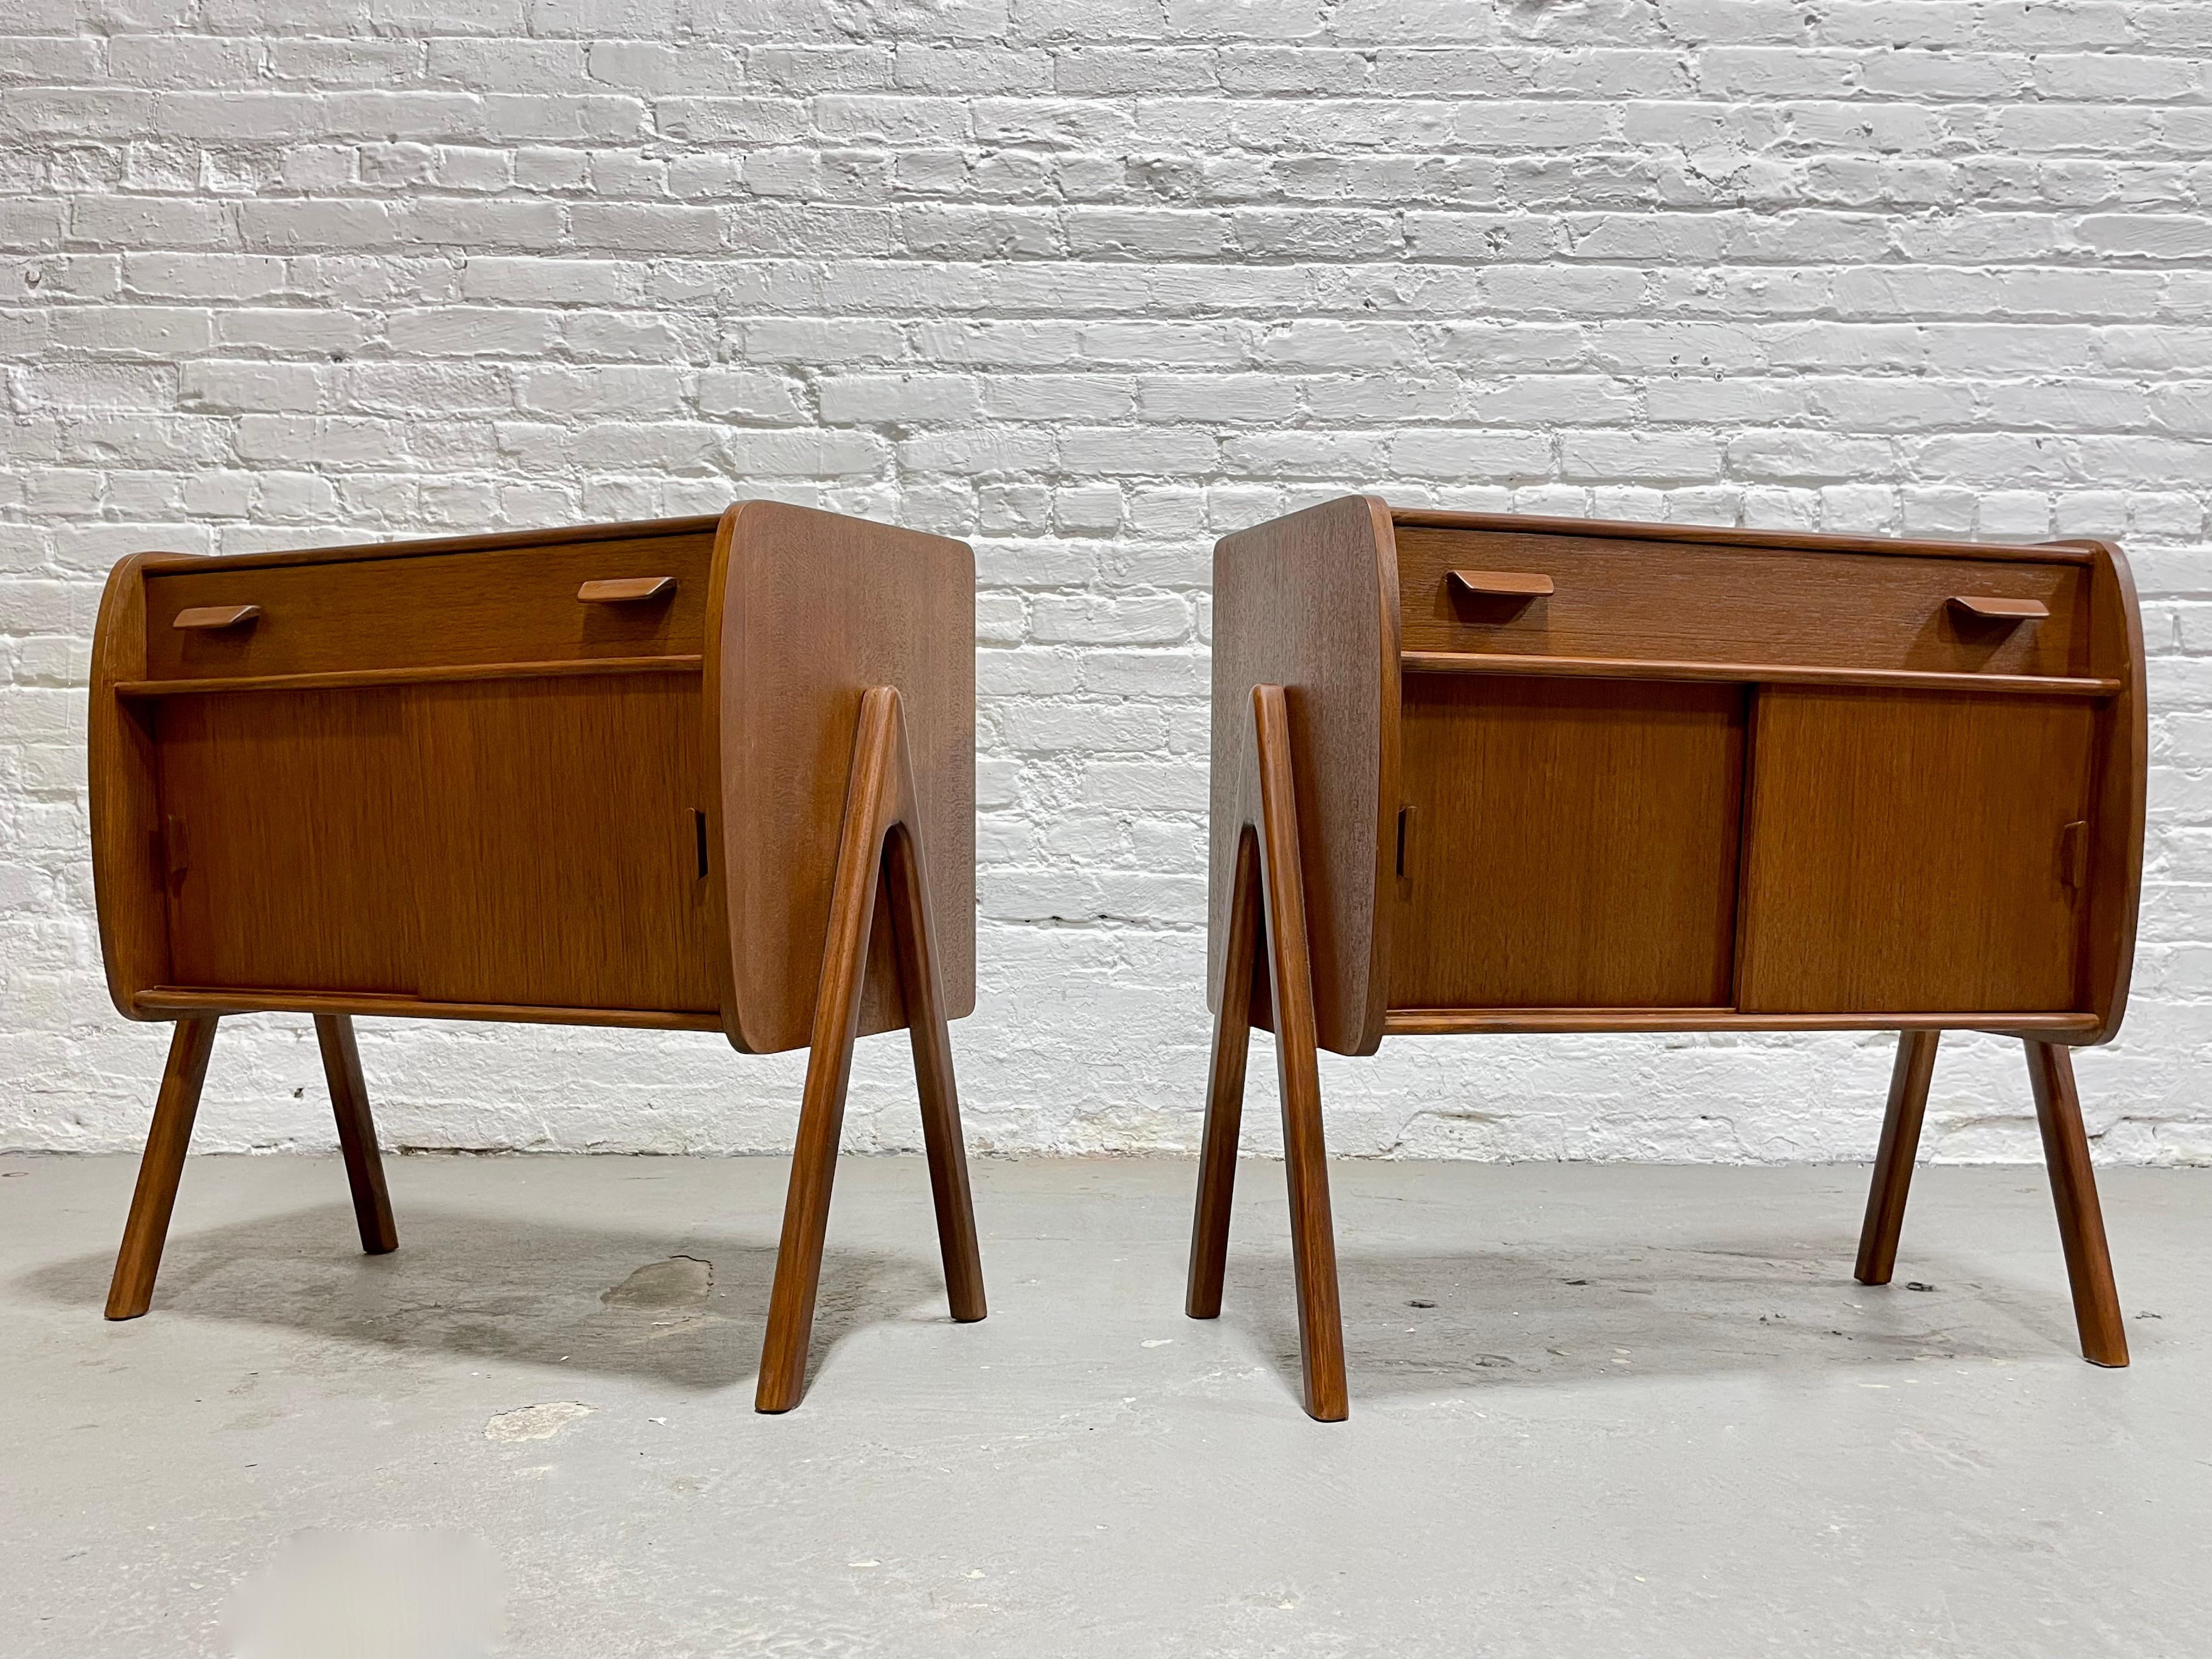 Pair of Handmade Mid-Century Modern styled Teak Cabinets / Entryway Cabinets. Perfect bedside cabinets or storage cabinets anywhere in your home. Fantastic design details such as floating legs, sliding doors and drawer storage and finished back.